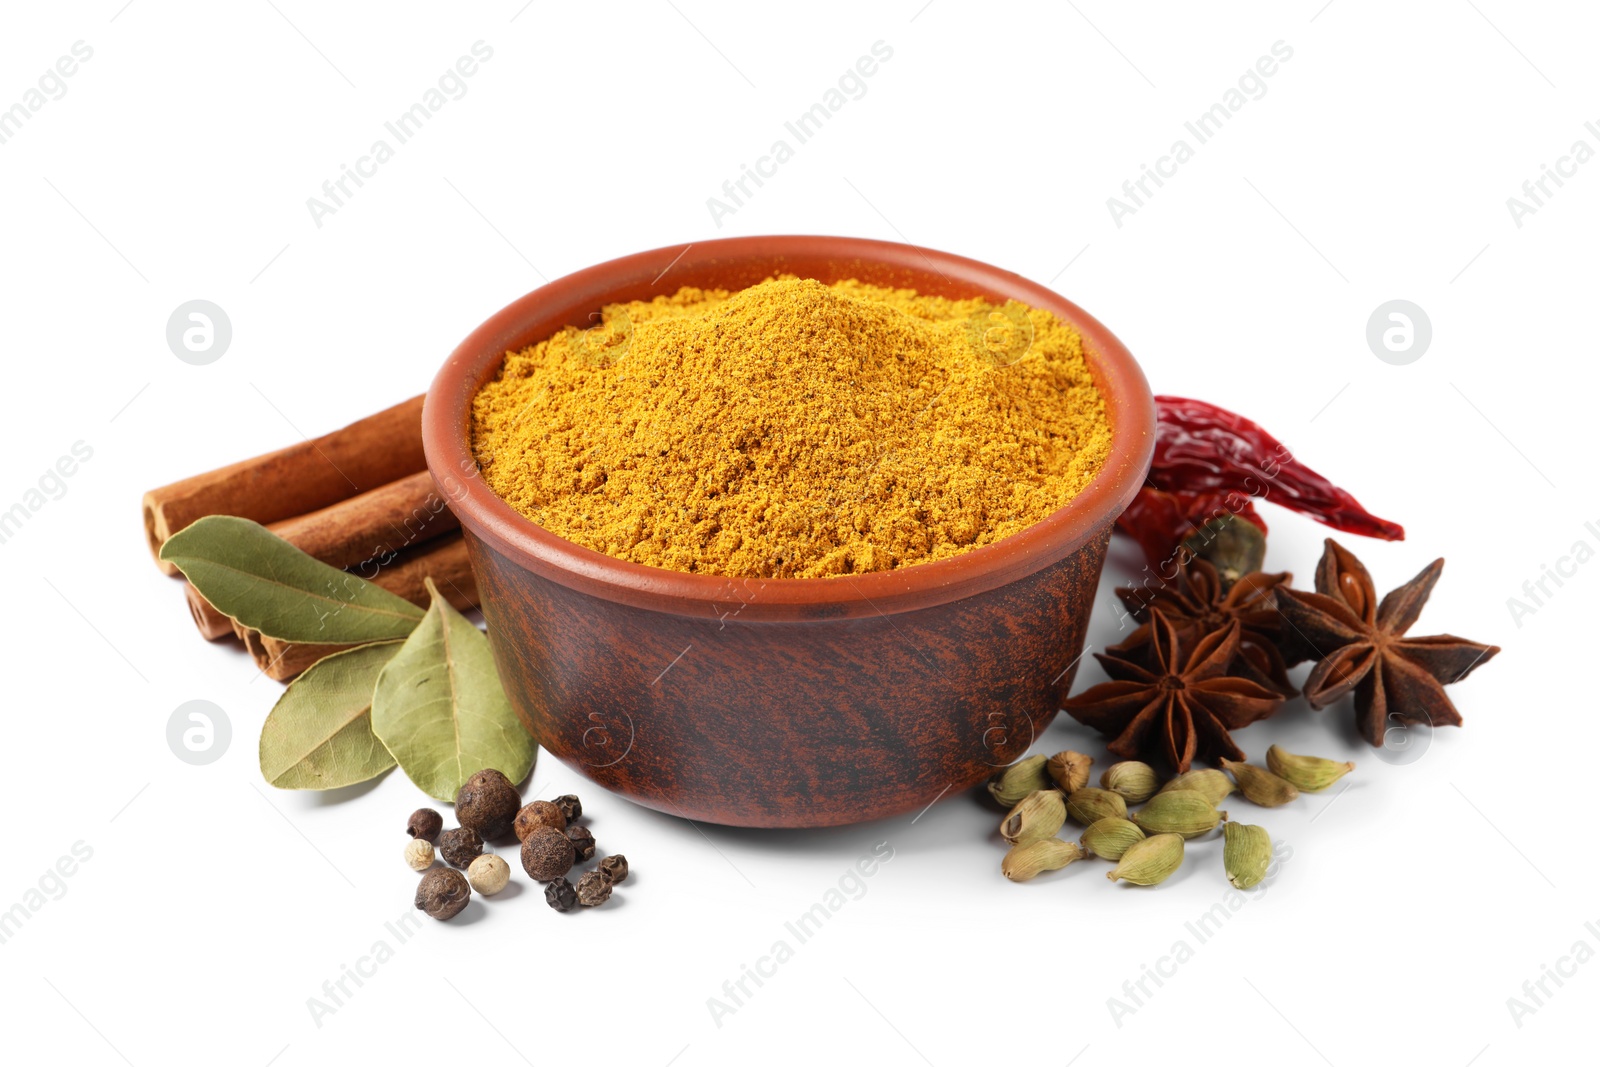 Photo of Curry powder in bowl and other spices isolated on white